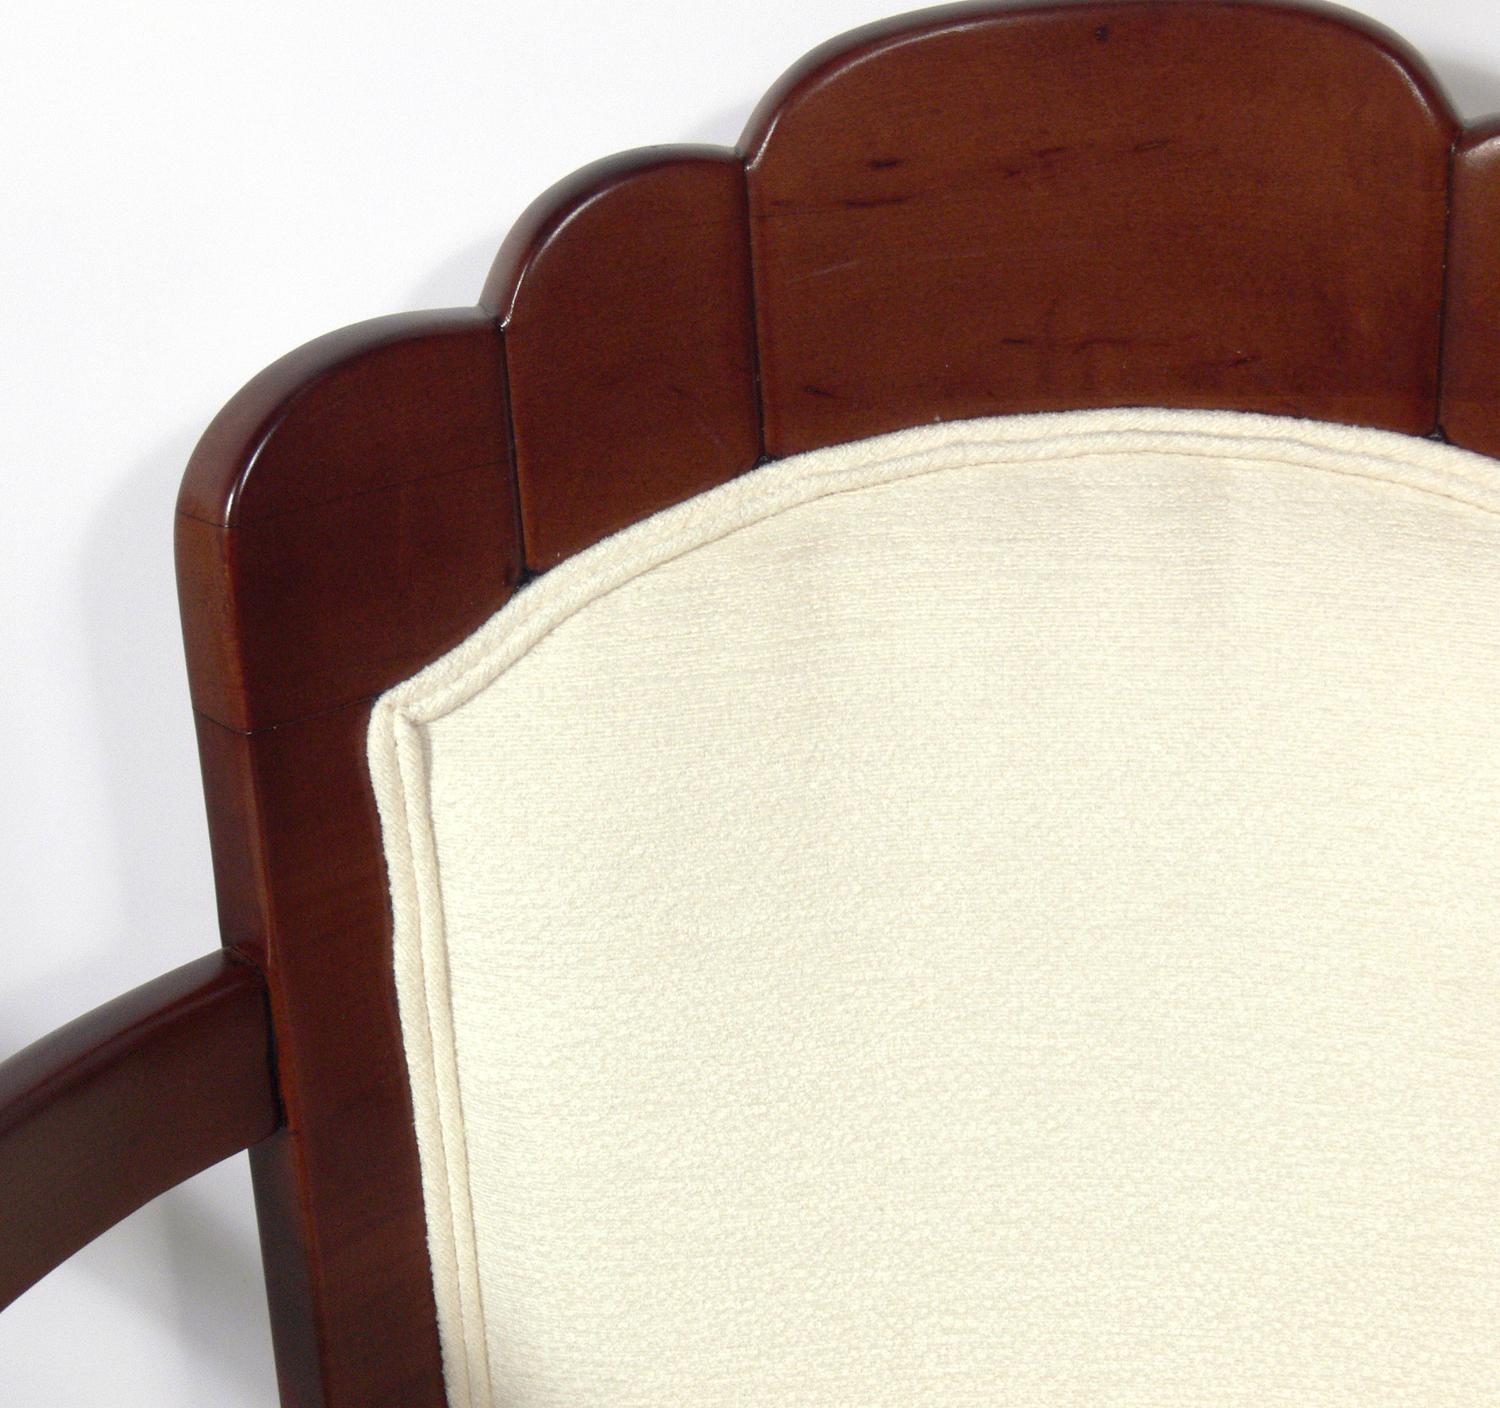 Mid-20th Century Pair of French Art Deco Armchairs by Pierre Patout for the Ile de France